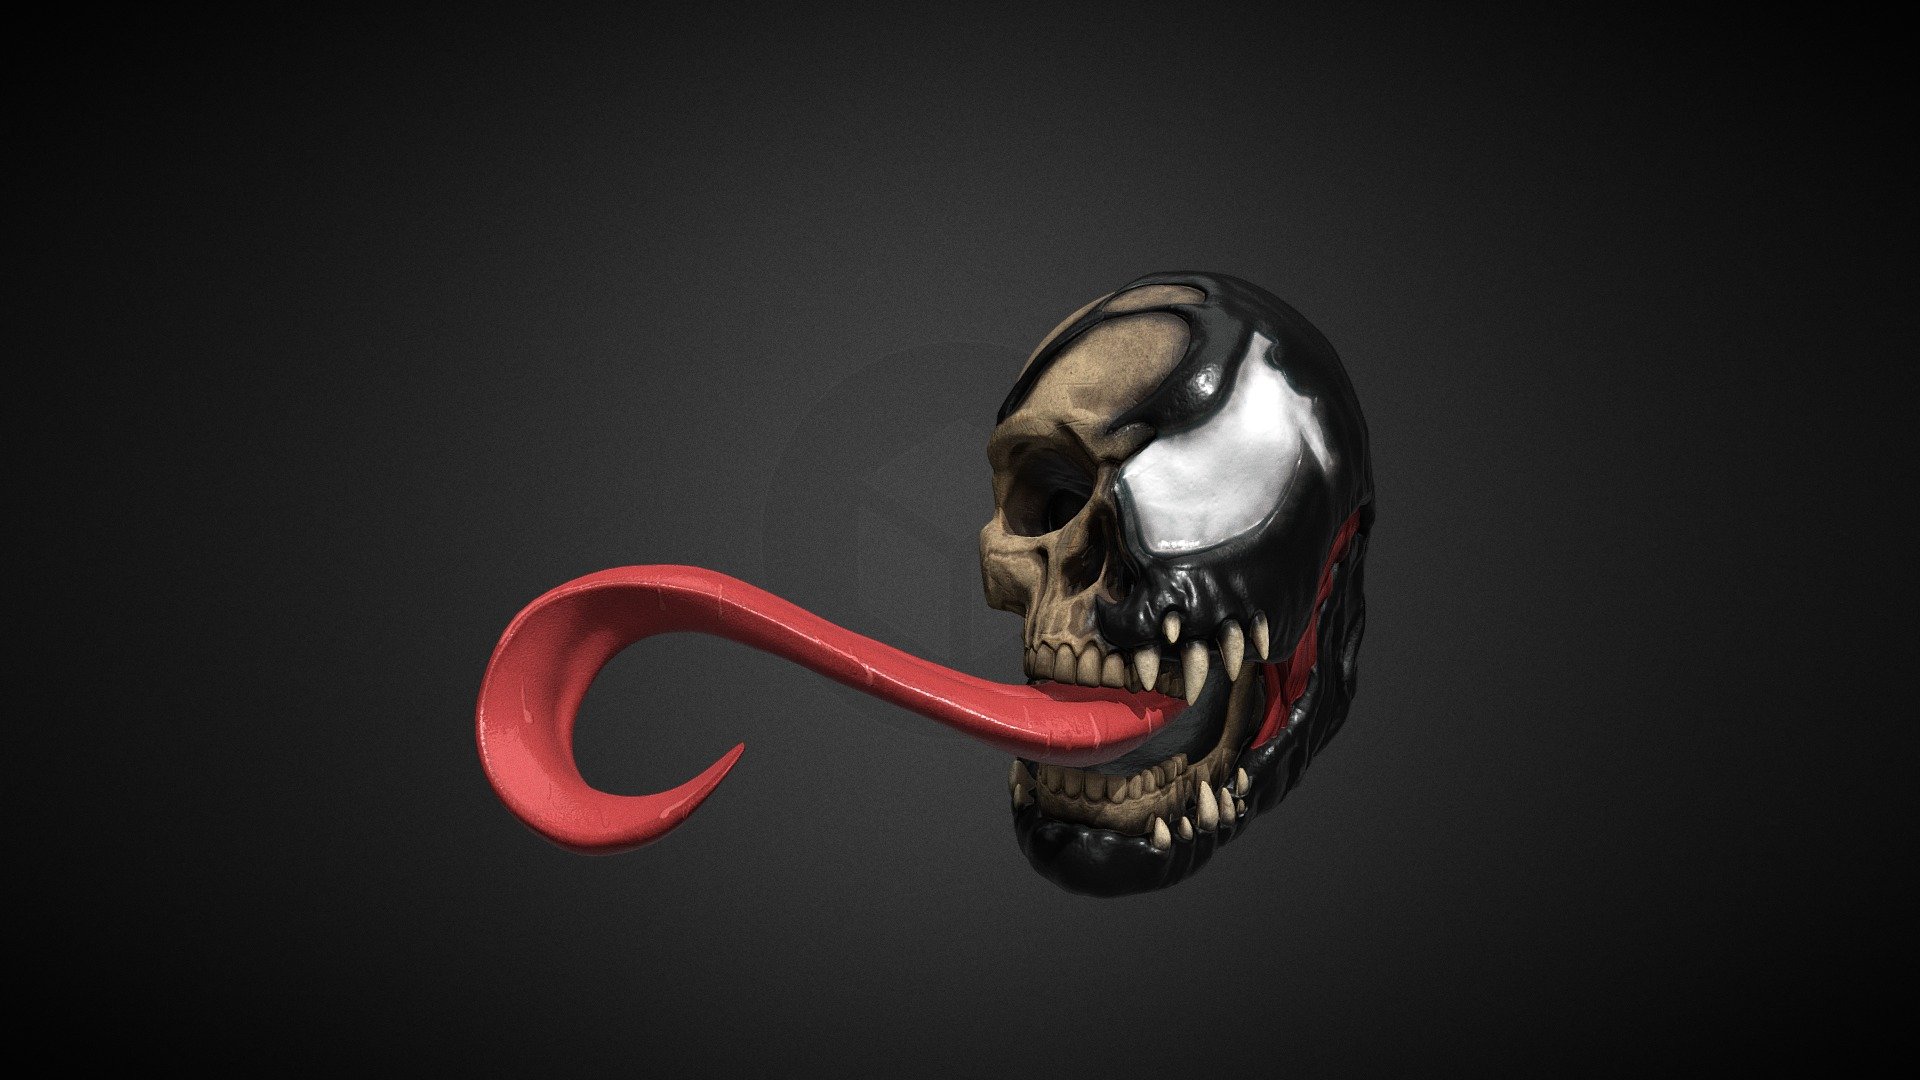 Based on the amazing work of Jack of the Dust https://www.instagram.com/jackofthedust/

Venom Skull made in Zbrush and textured in Substance painter 3d model